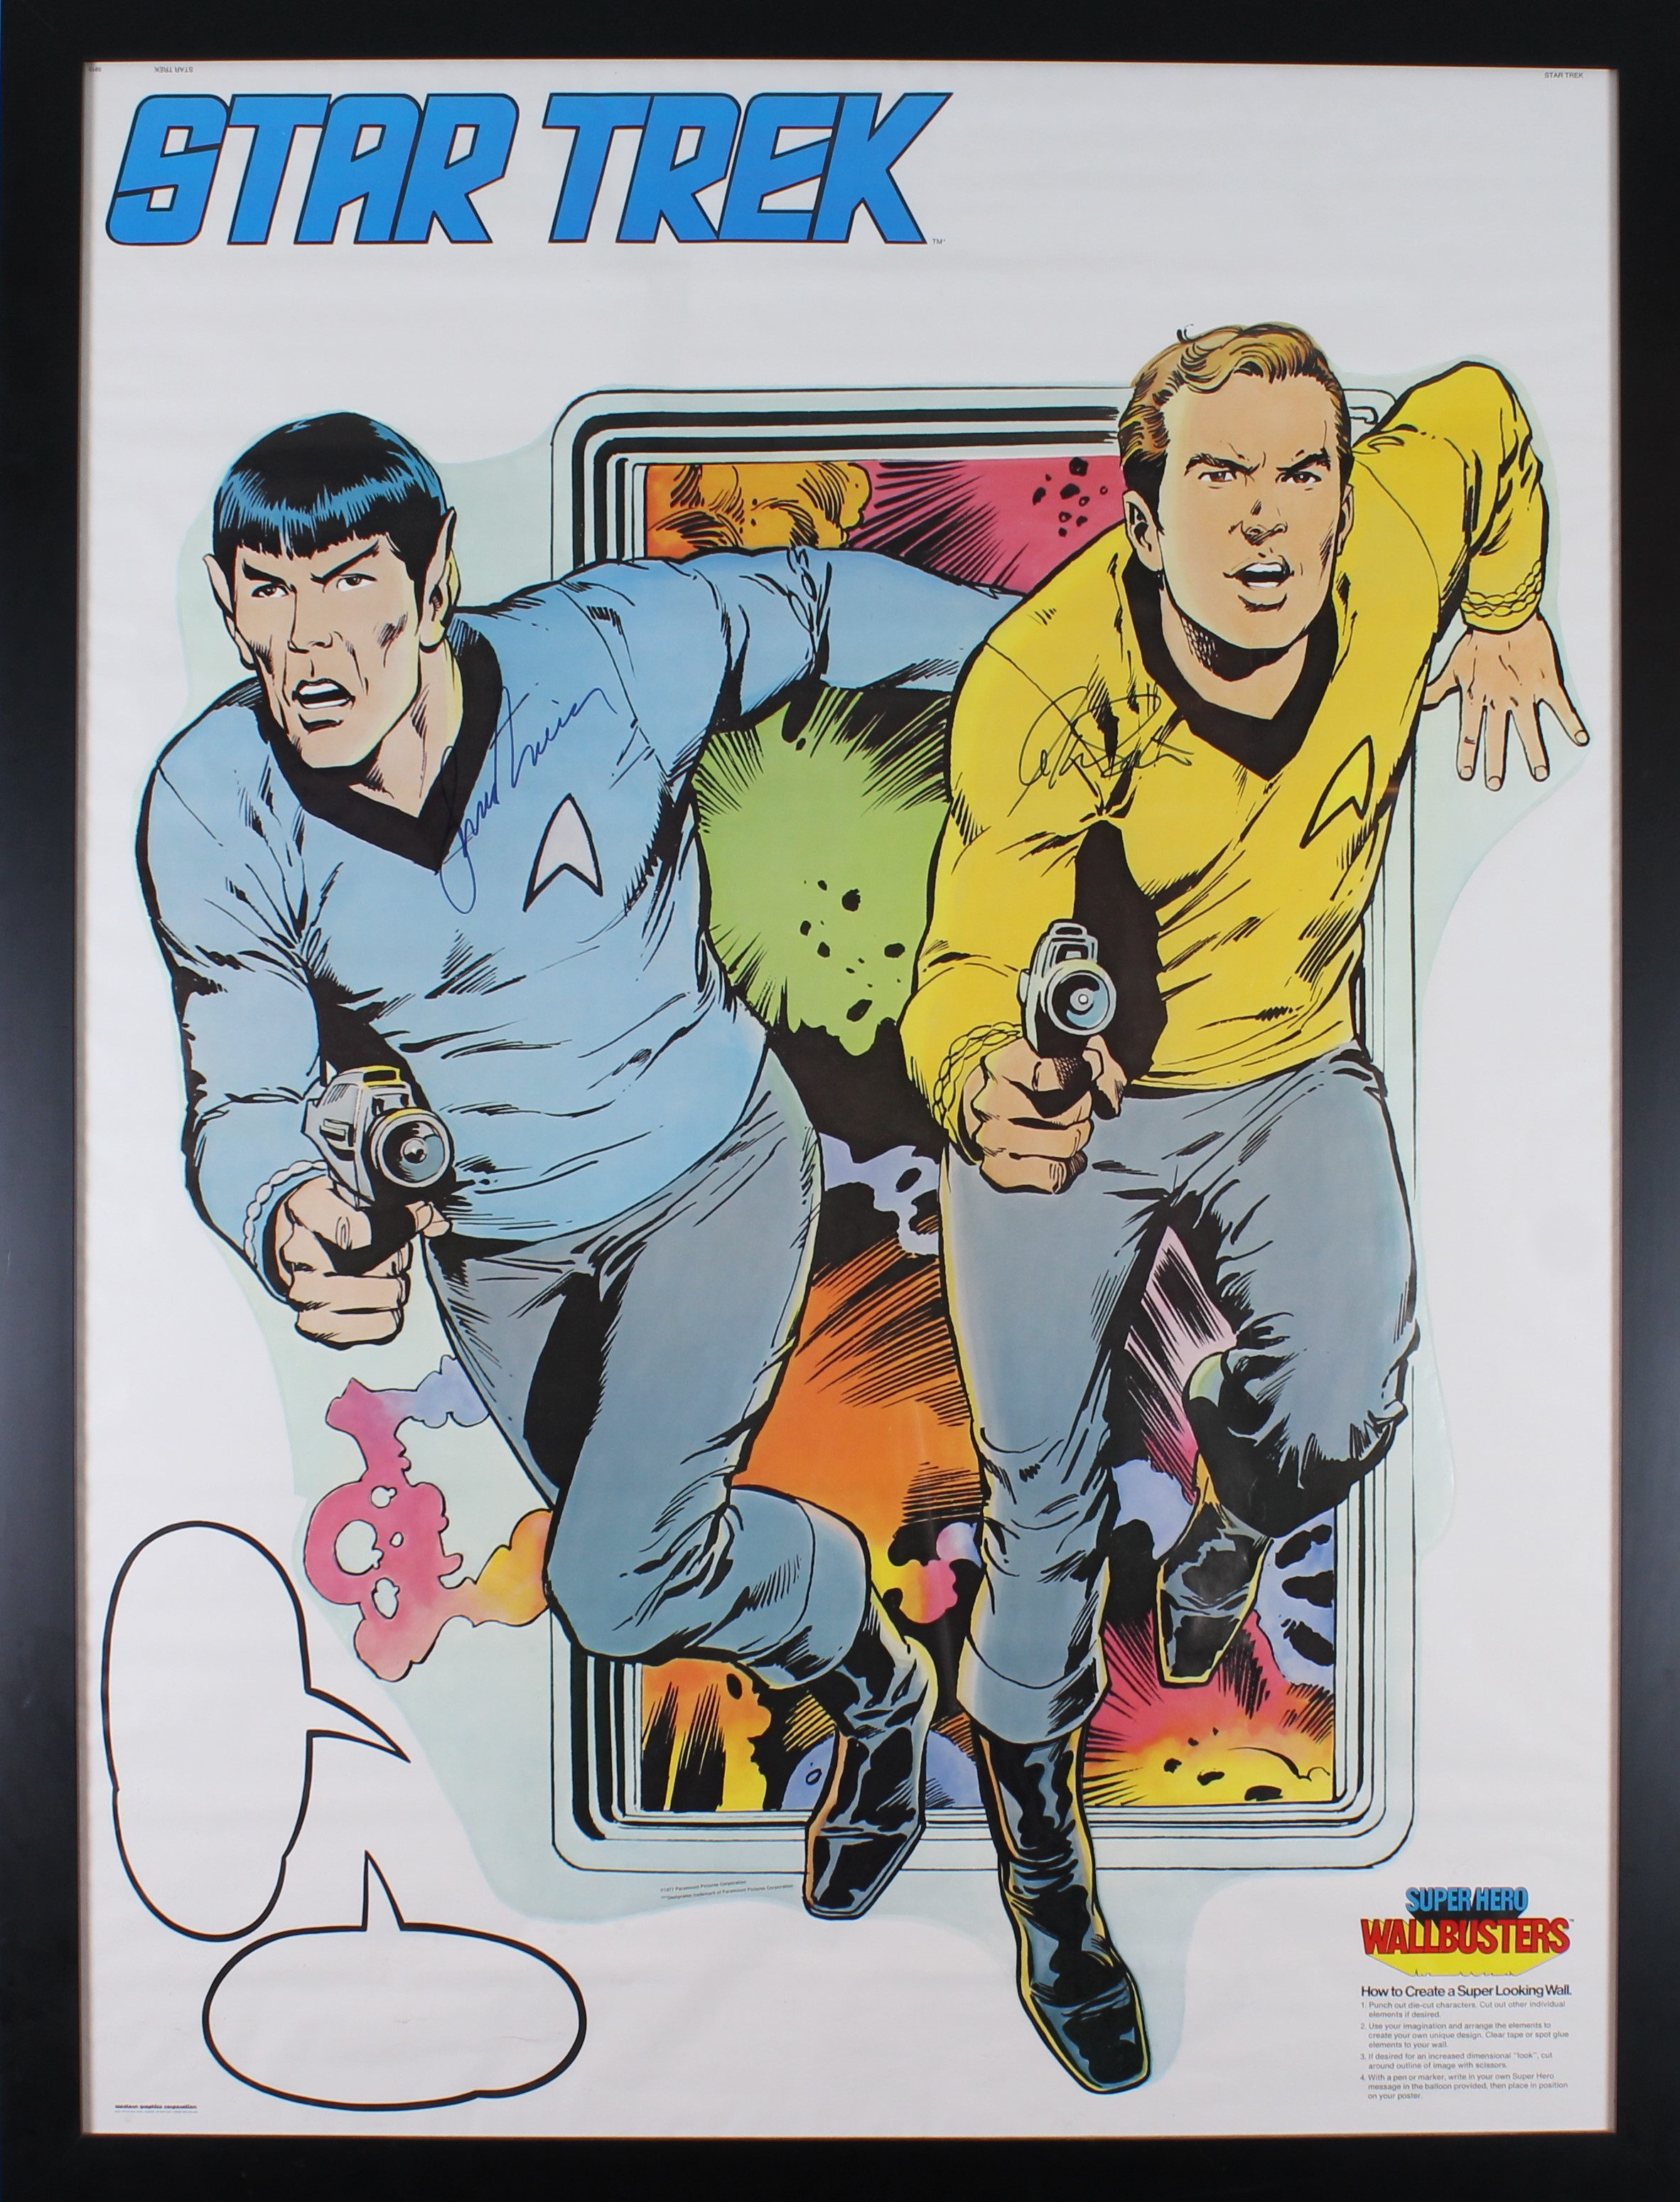 An image of the poster, showing a colour drawing of Kirk and Spock running towards the viewer, each holding a phaser.